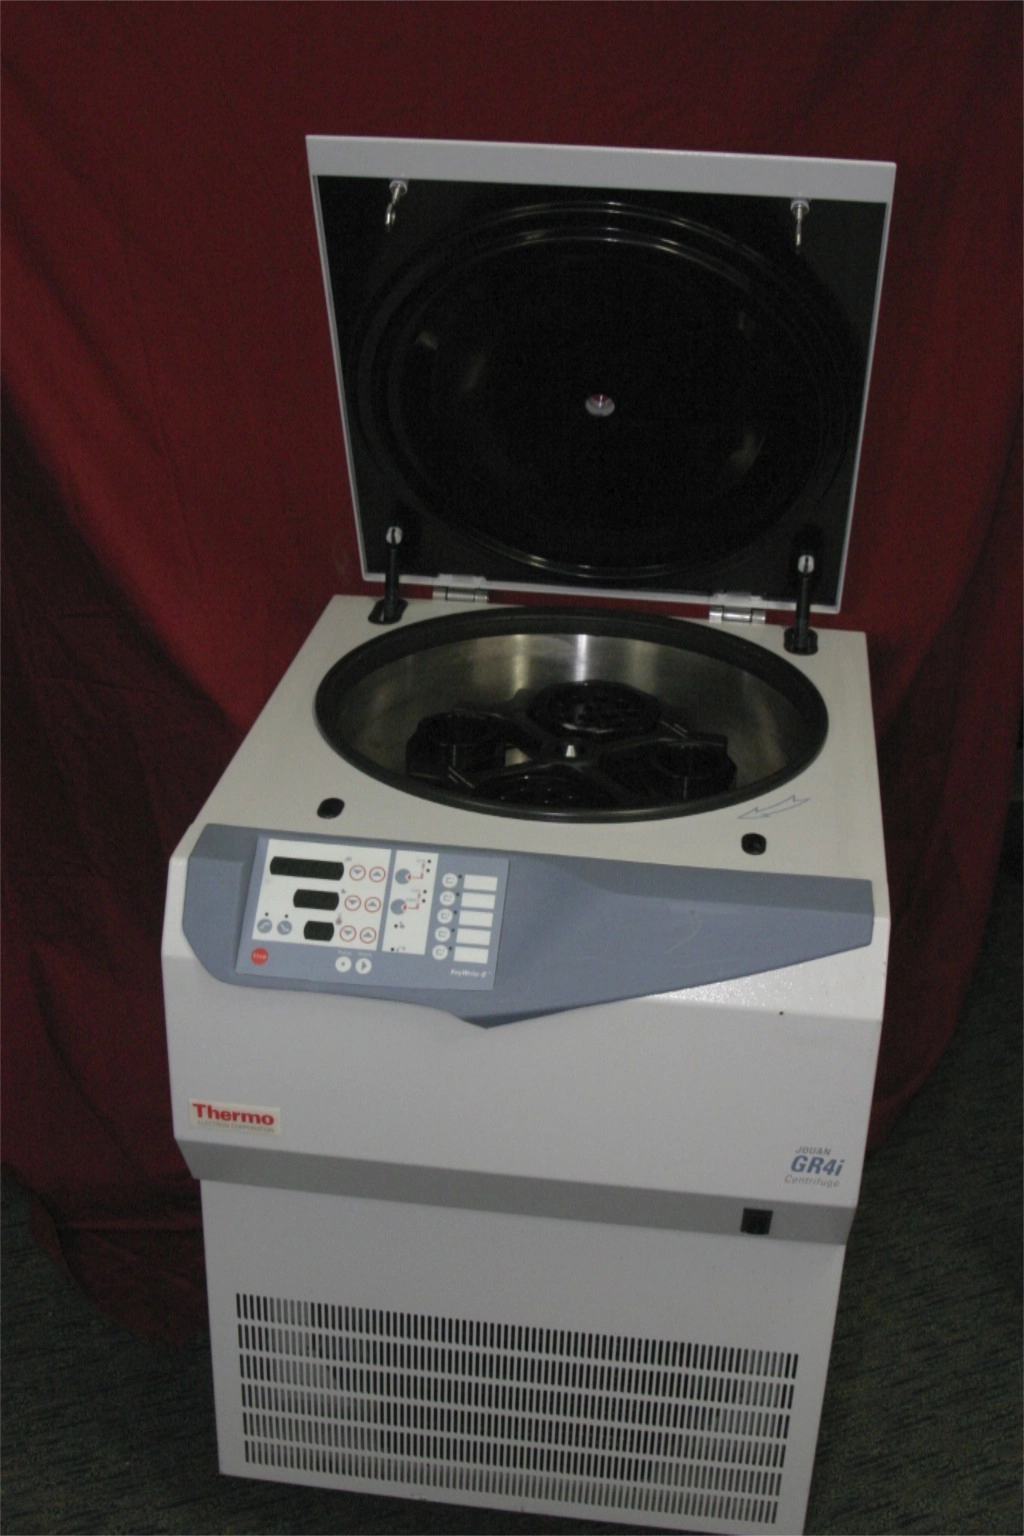 Thermo GR4i Jouan G4i Centrifuge with 4 swing bucket rotor, Thermo GR4i Jouan  G4i Centrifuge with 4 swing bucket rotor